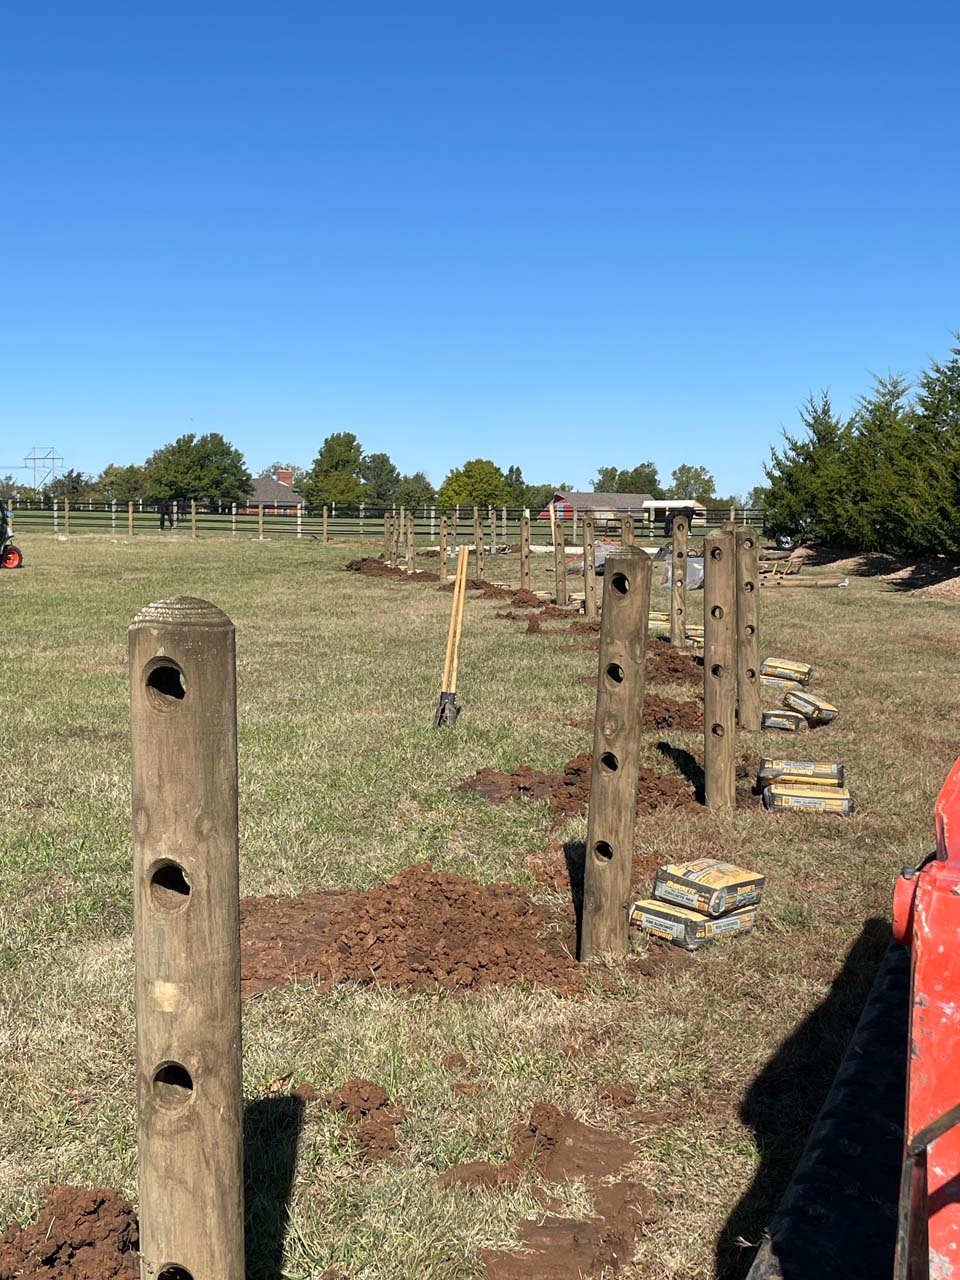 Fence posts are prepped